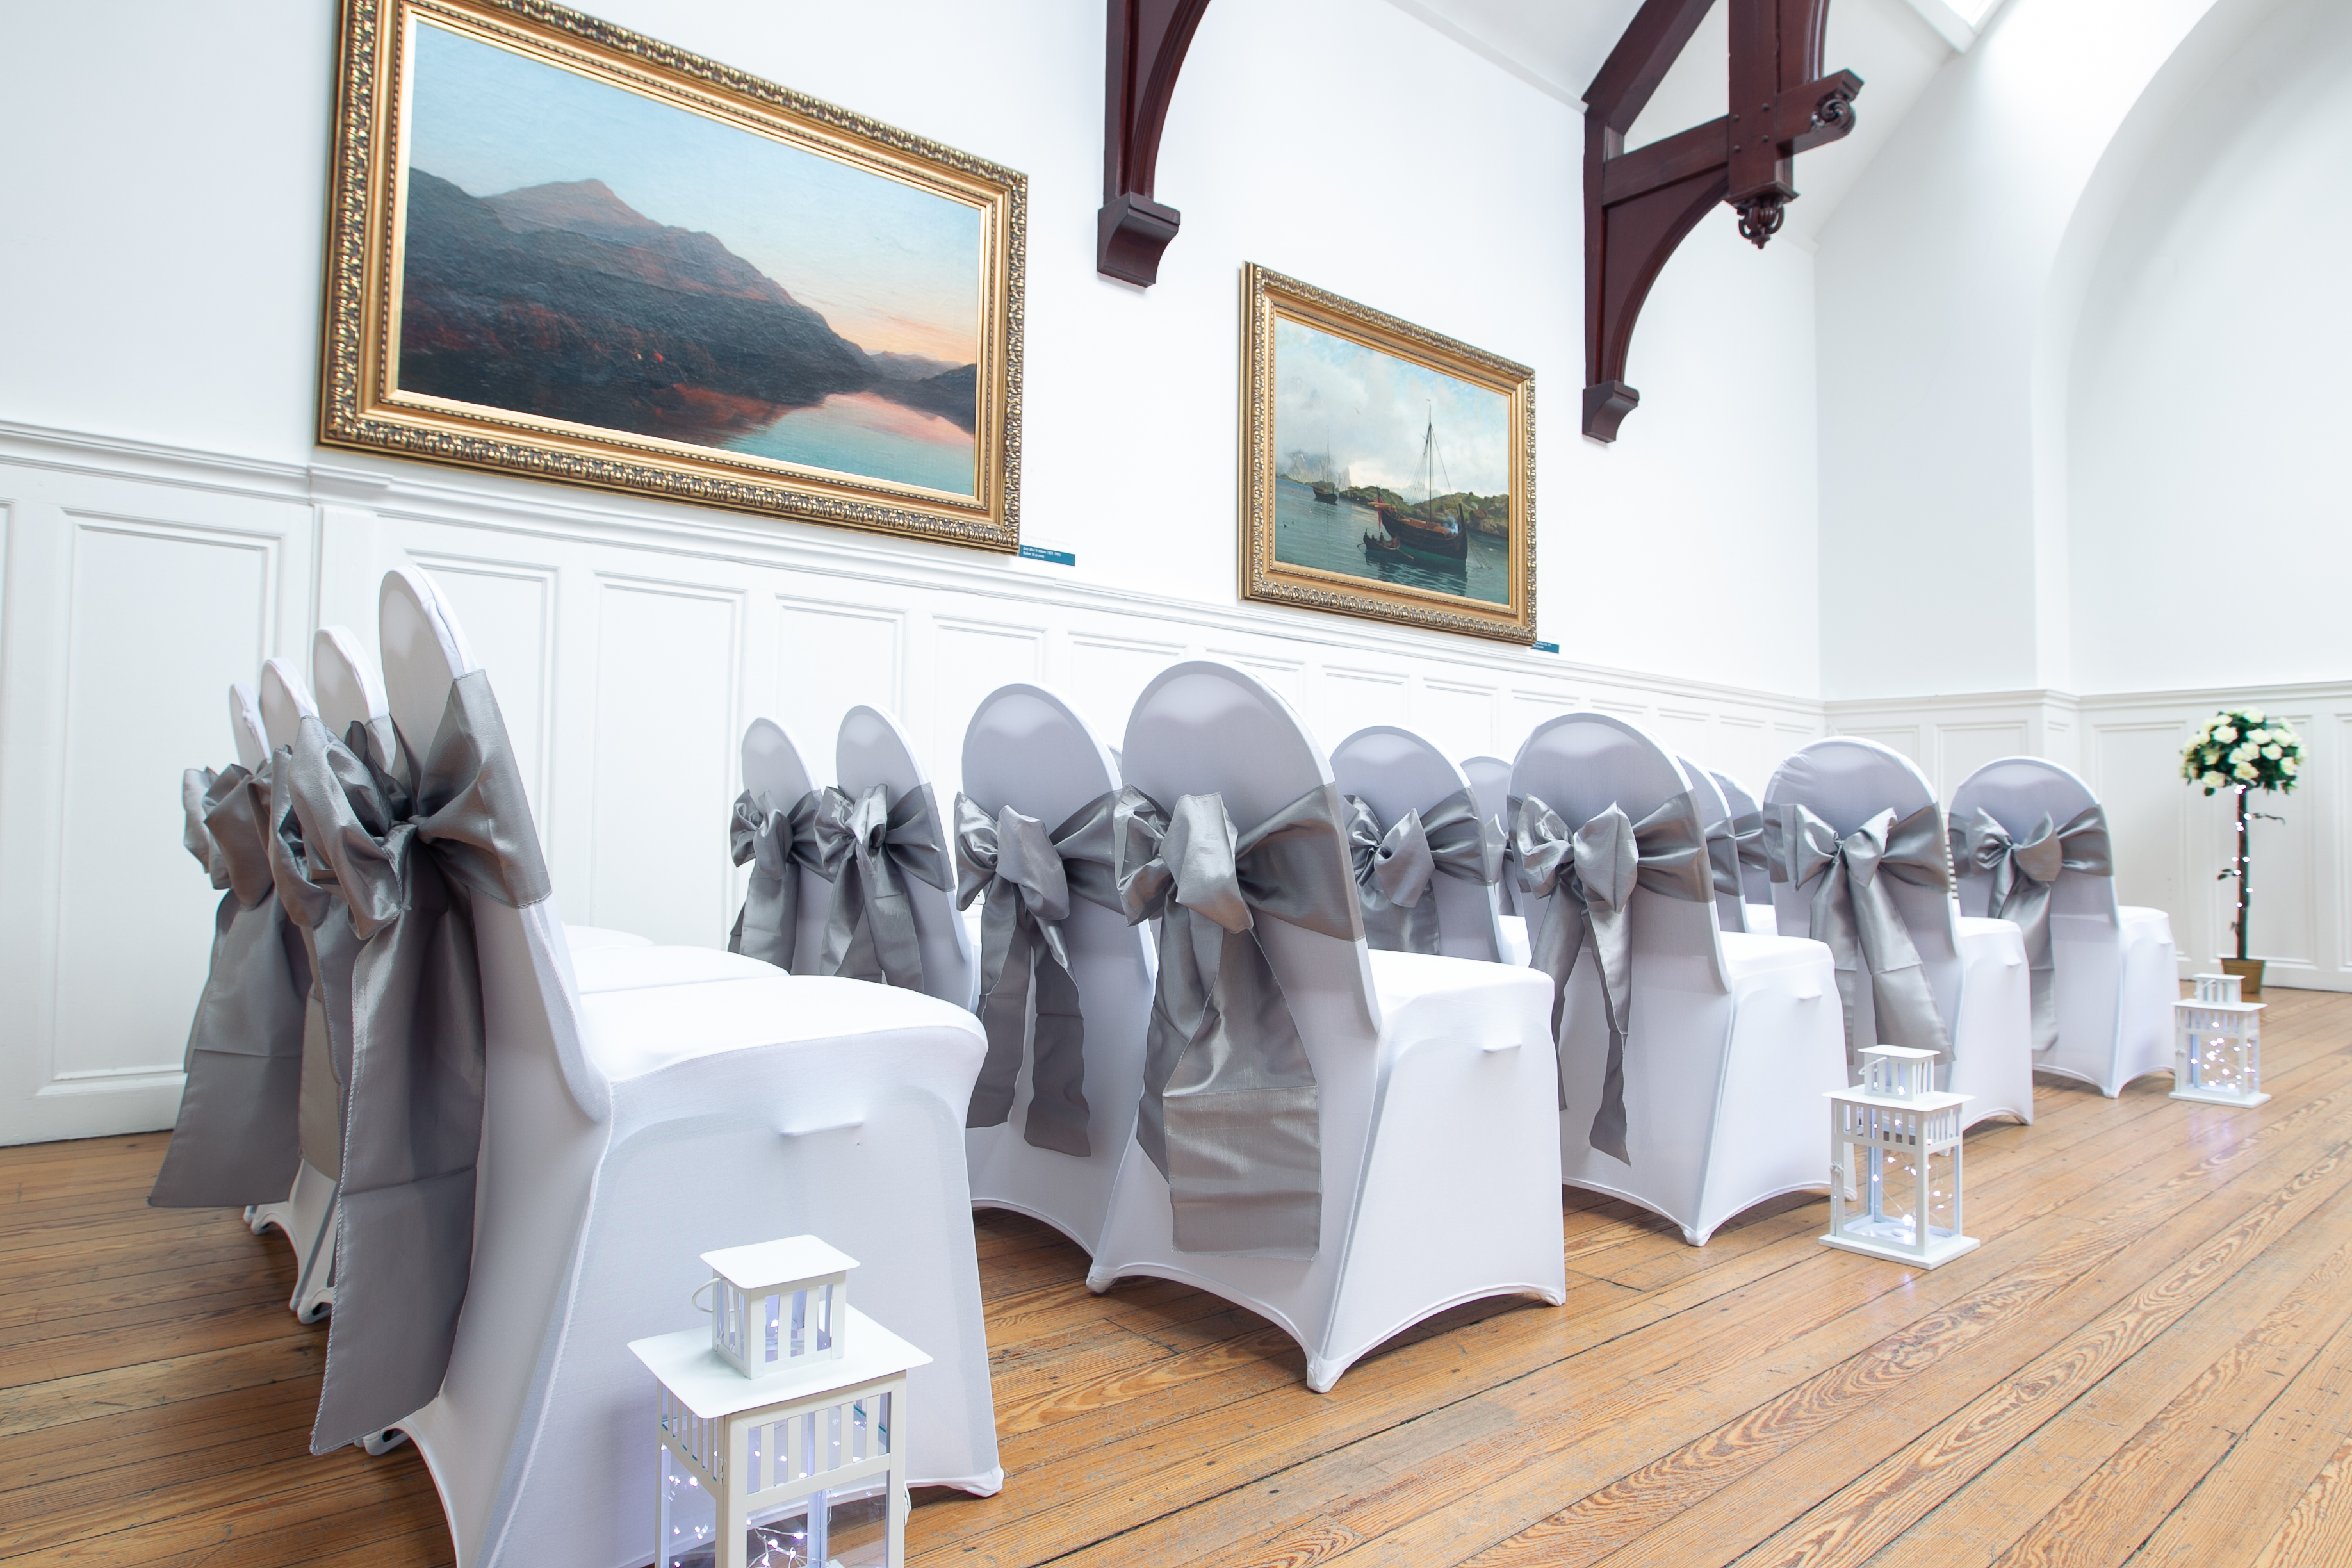 image of Ceremony Room - chairs dressed